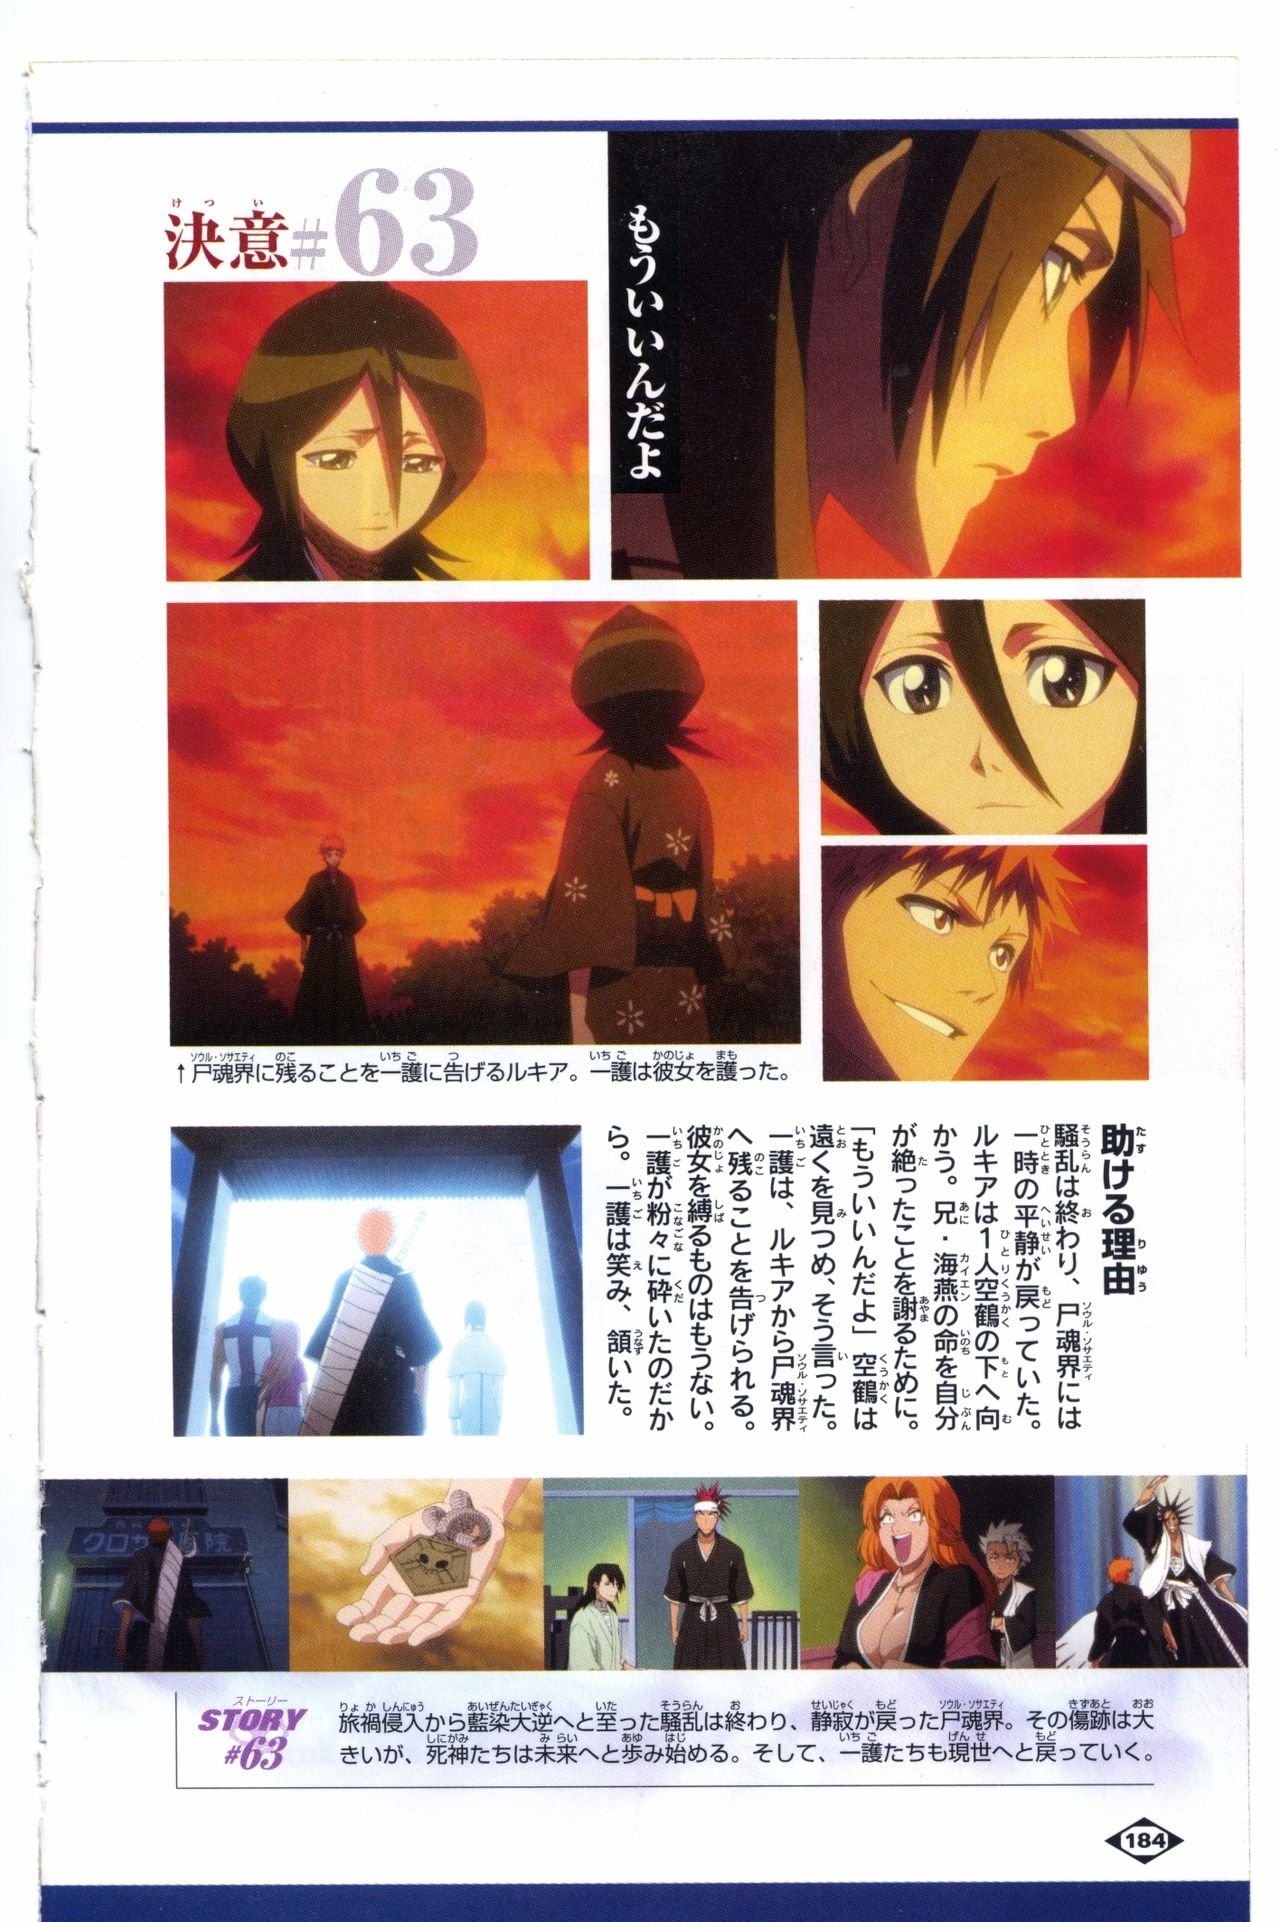 Bleach: Official Animation Book VIBEs 184